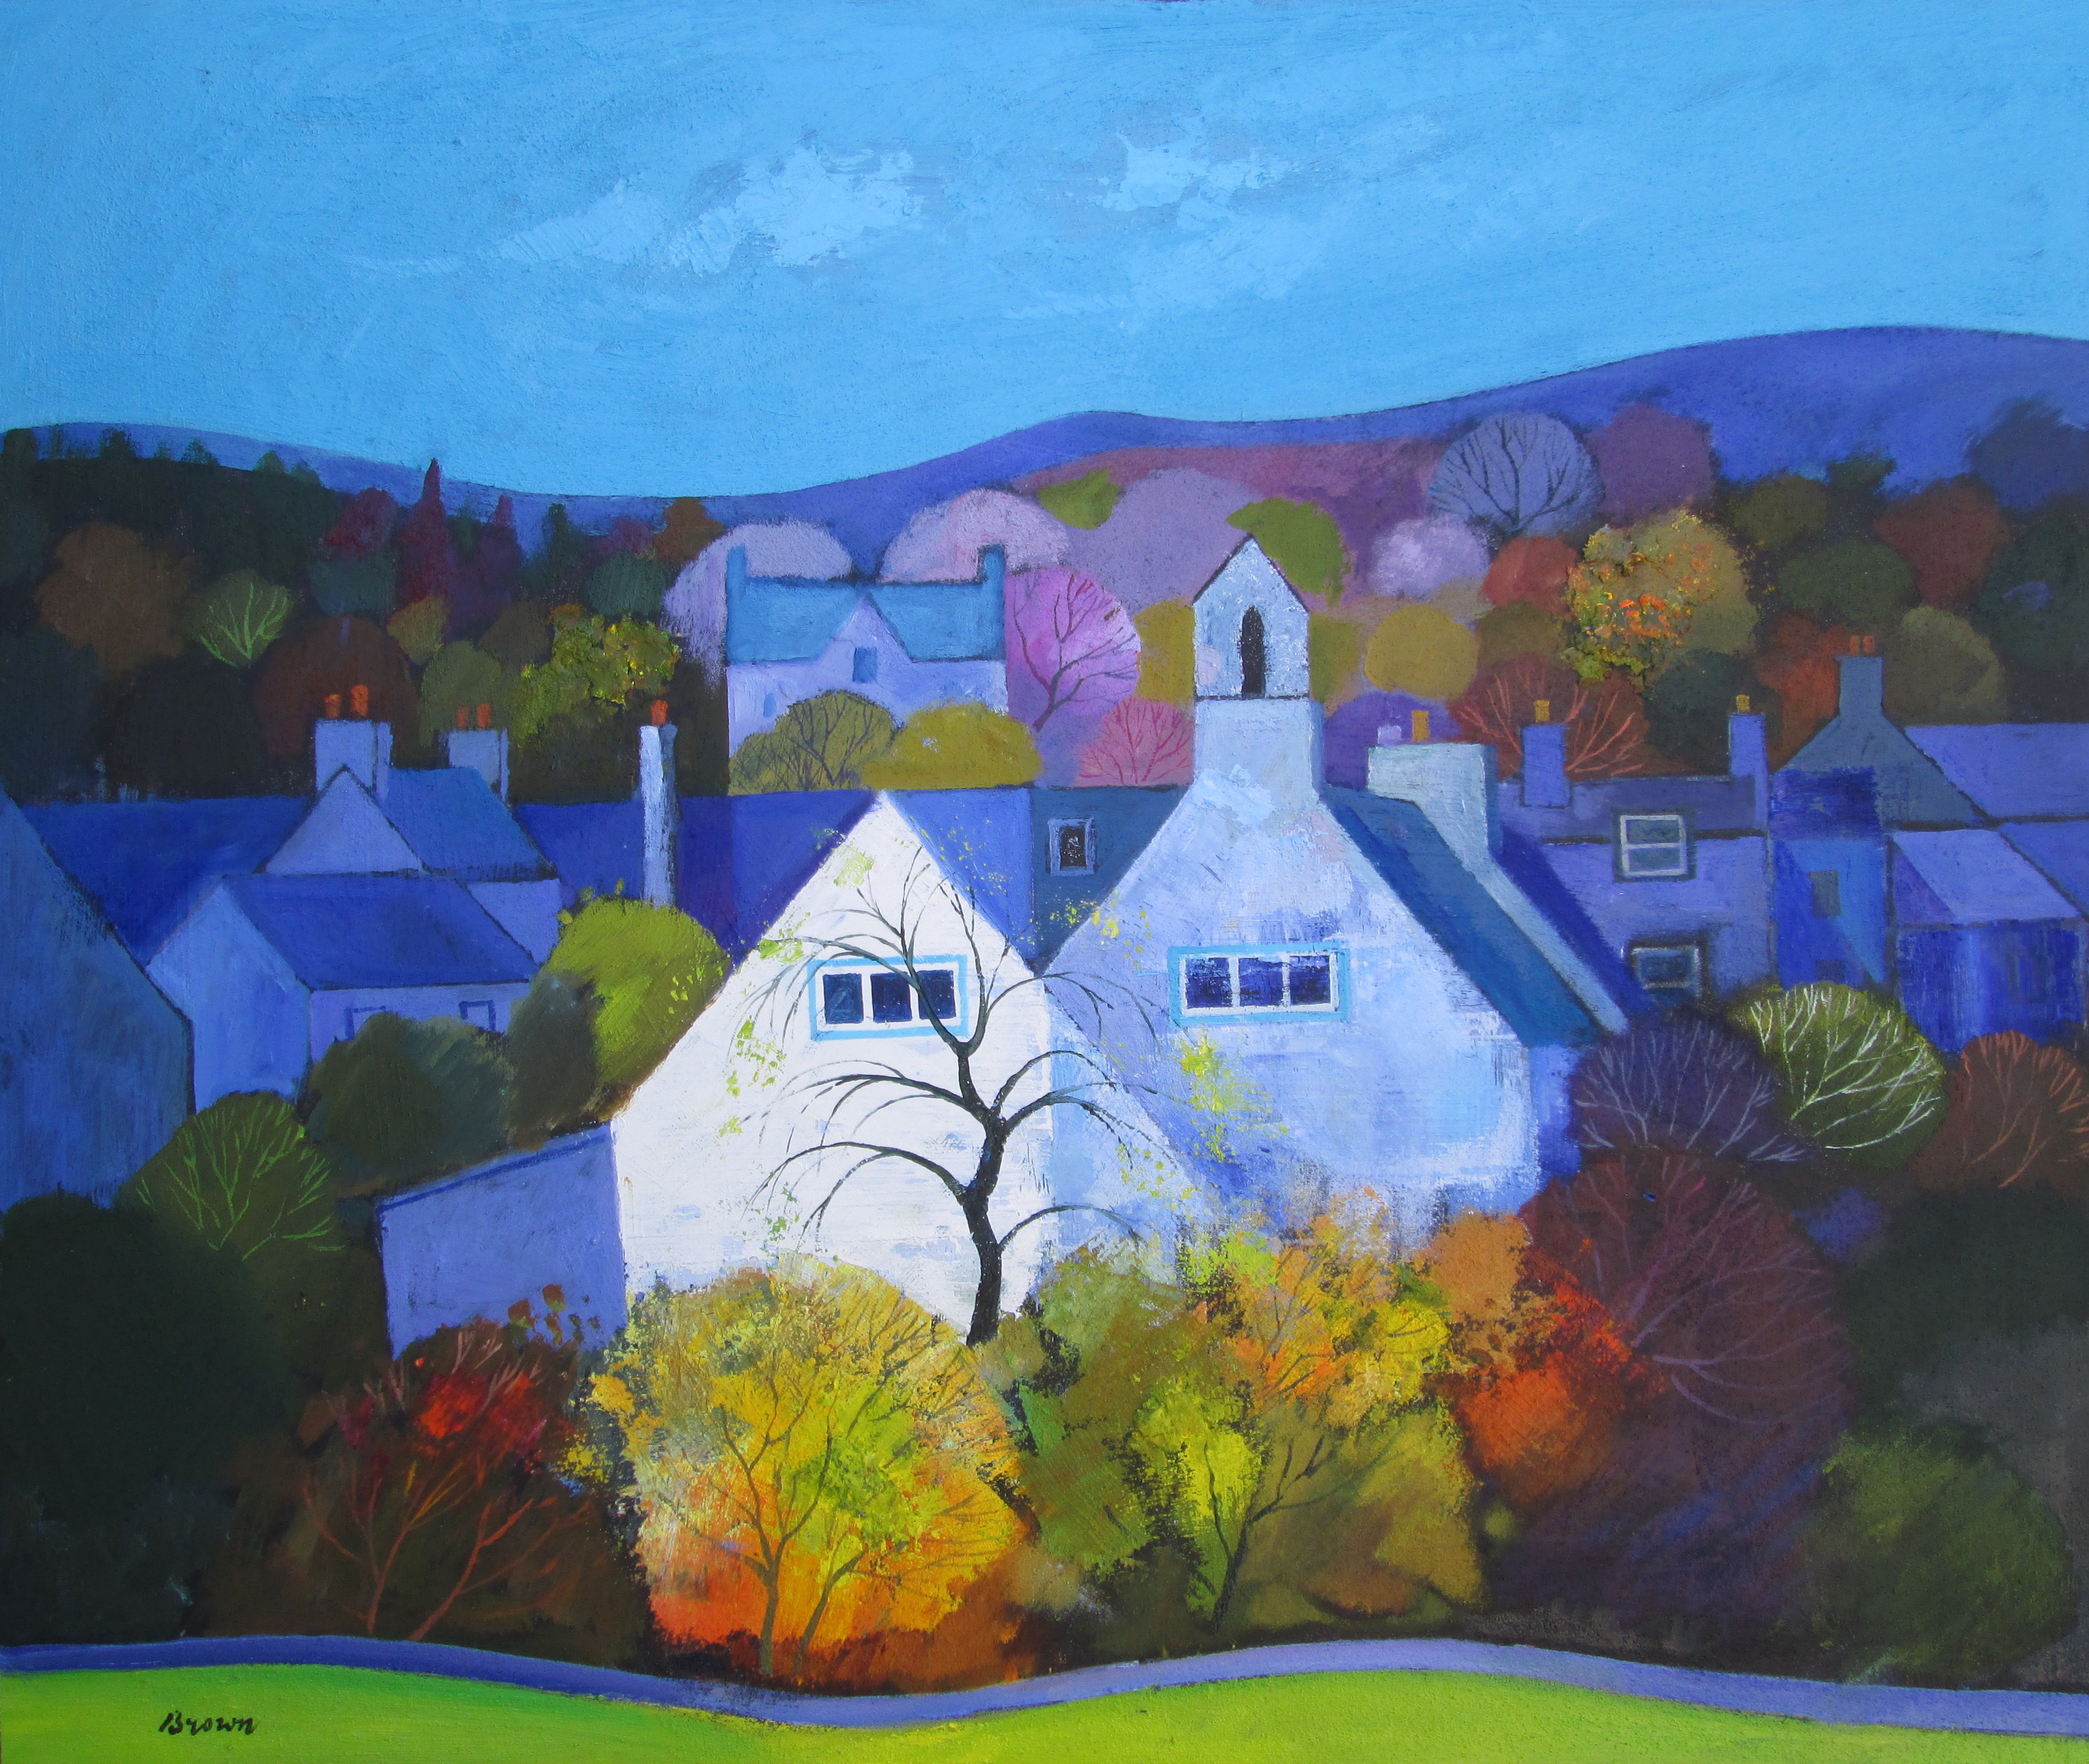 'The Old Schoolhouse' by artist Davy Brown